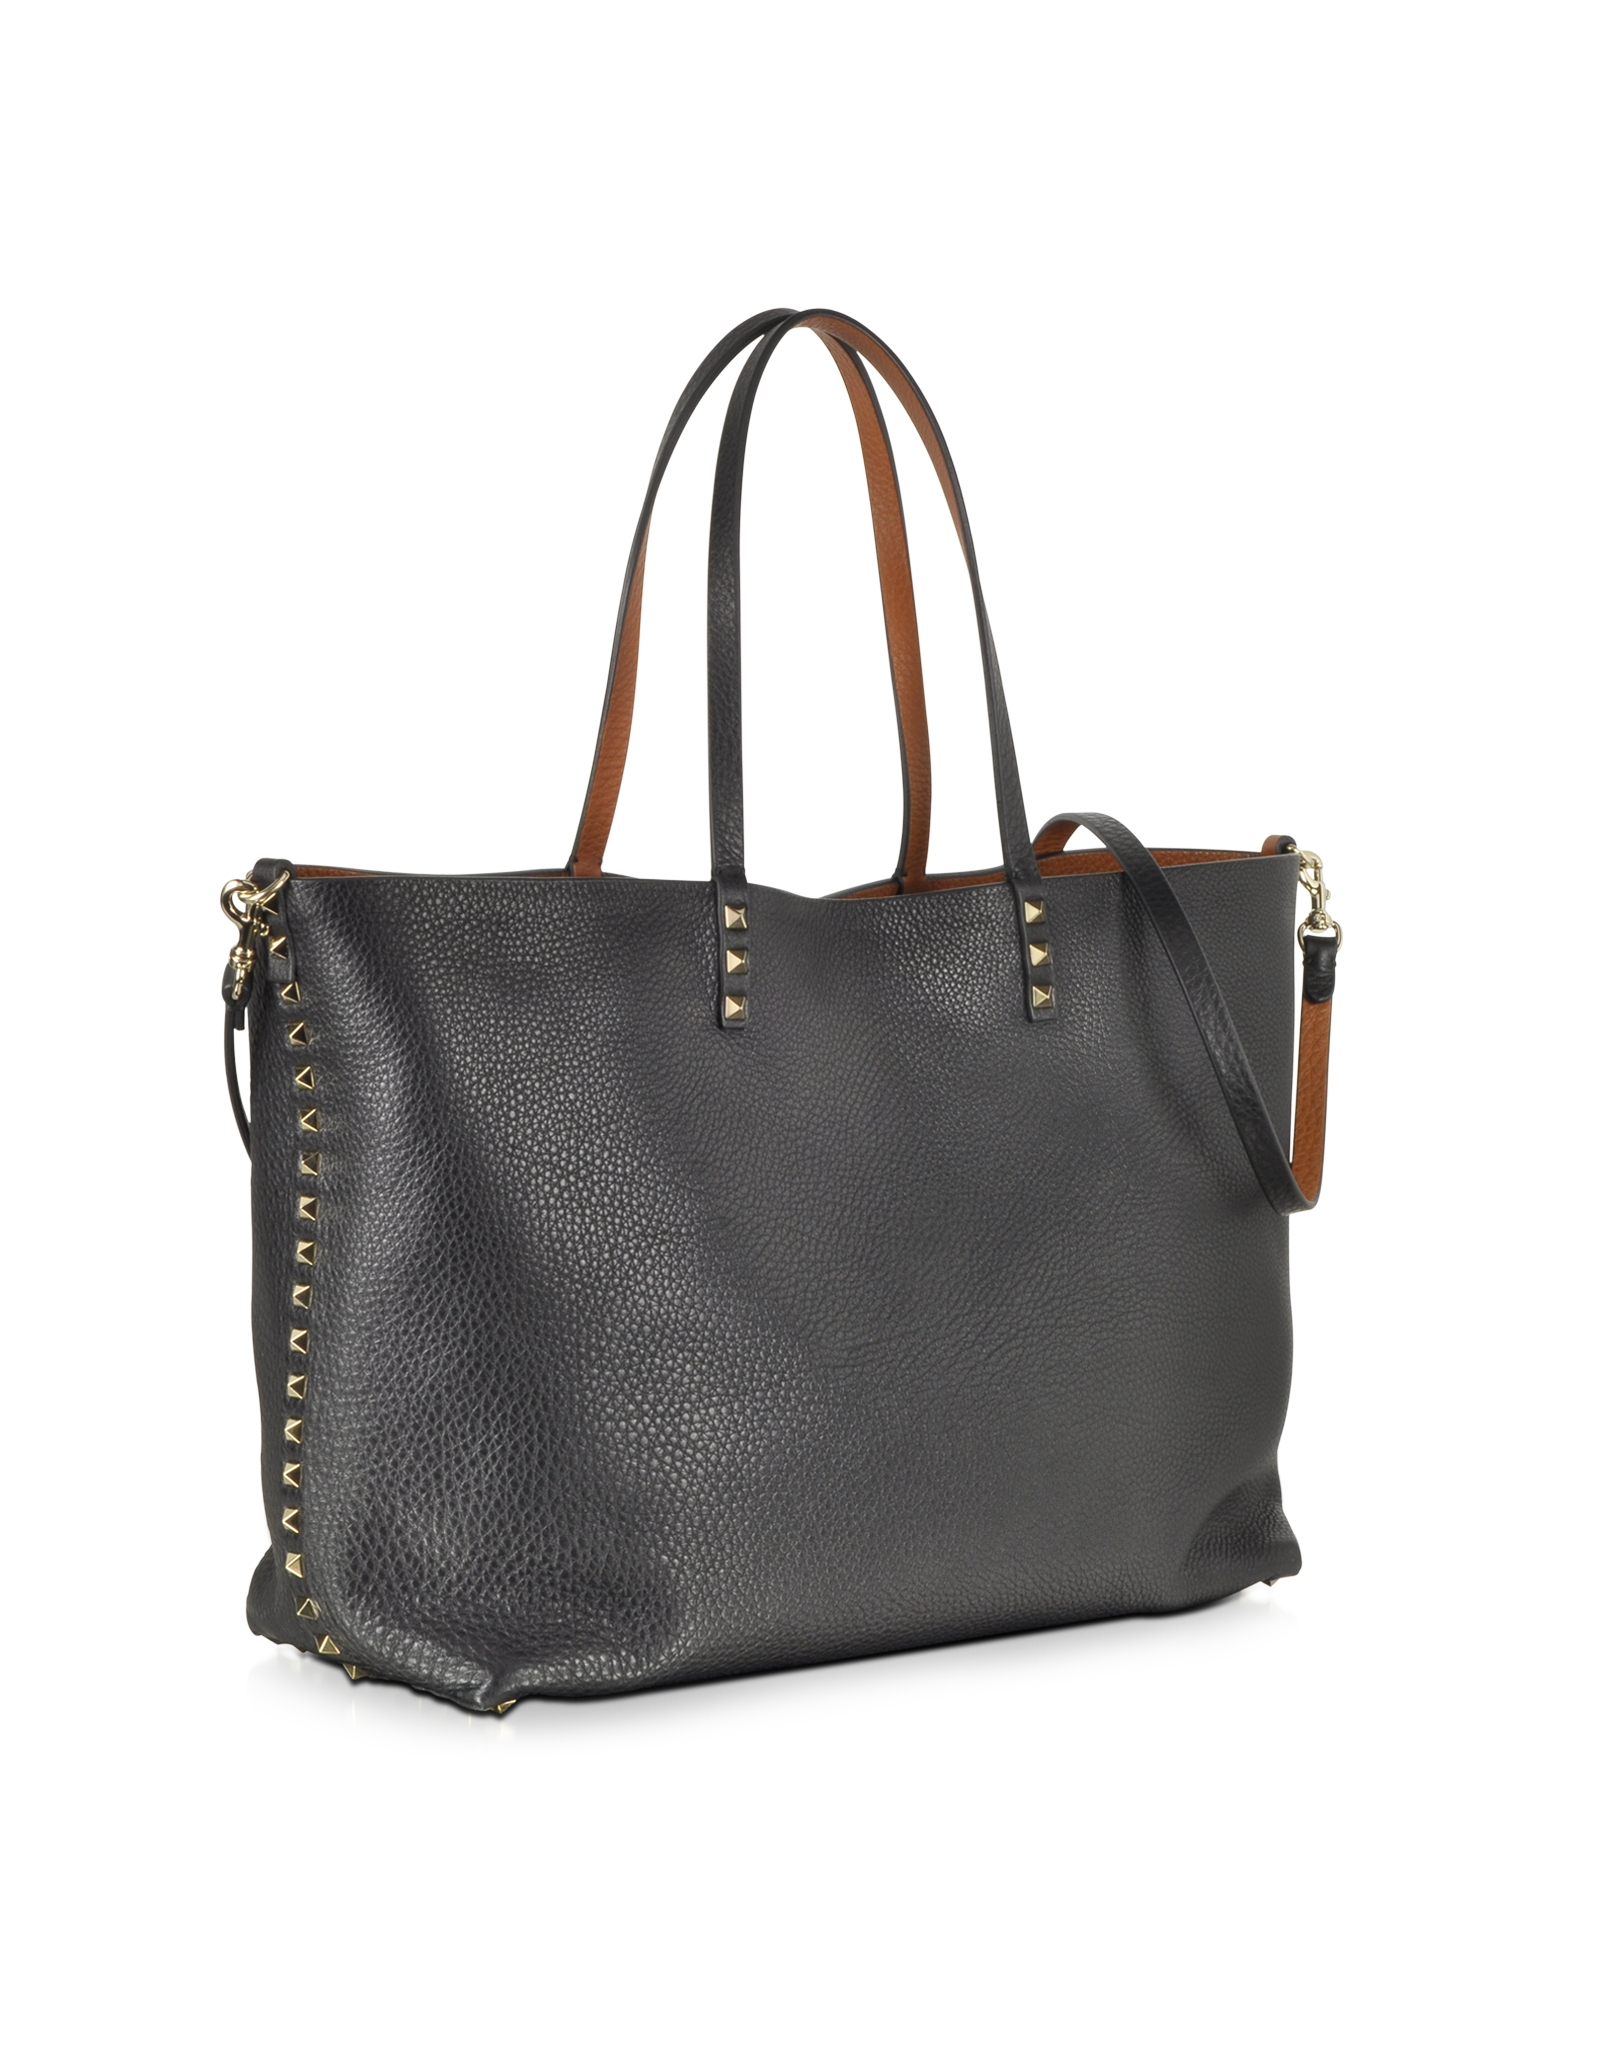 Lyst - Valentino Reversible Rockstud Leather Tote in Black